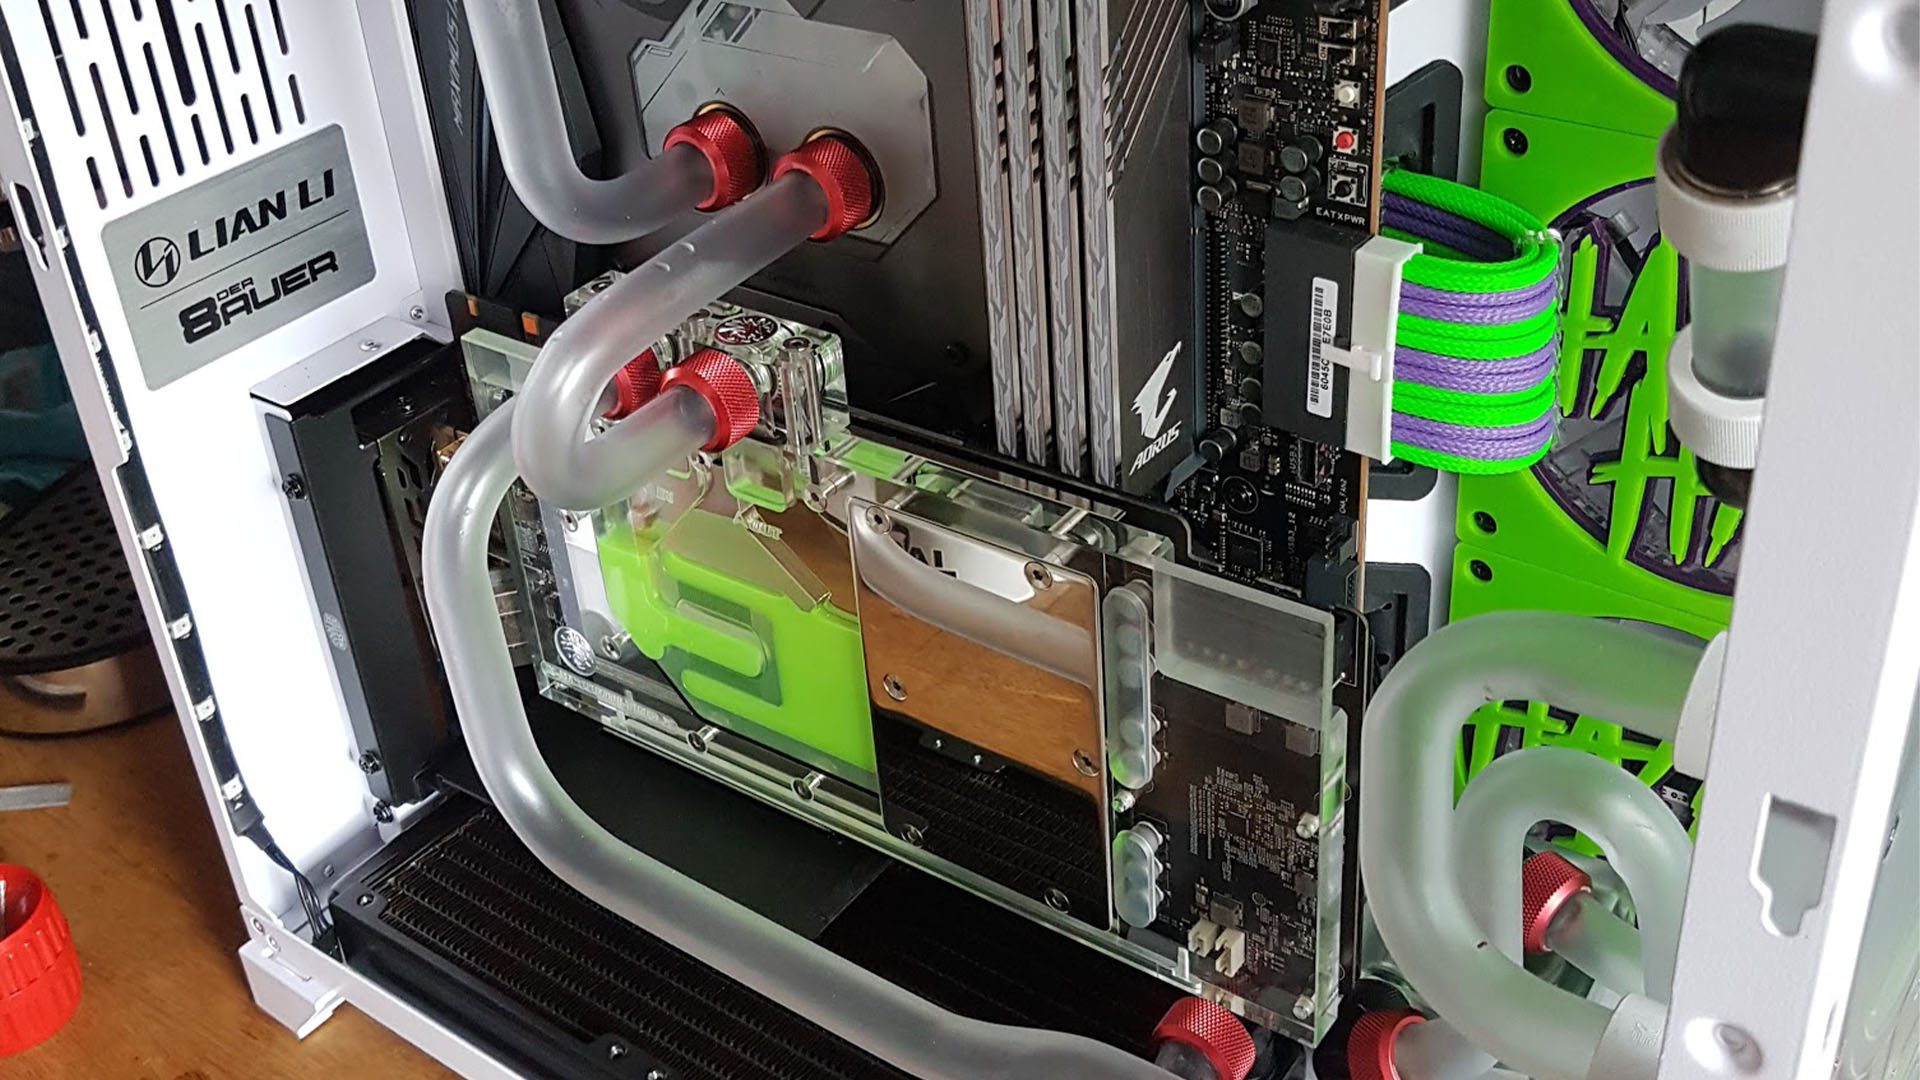 The distro plate and green cables inside the joker themed gaming pc